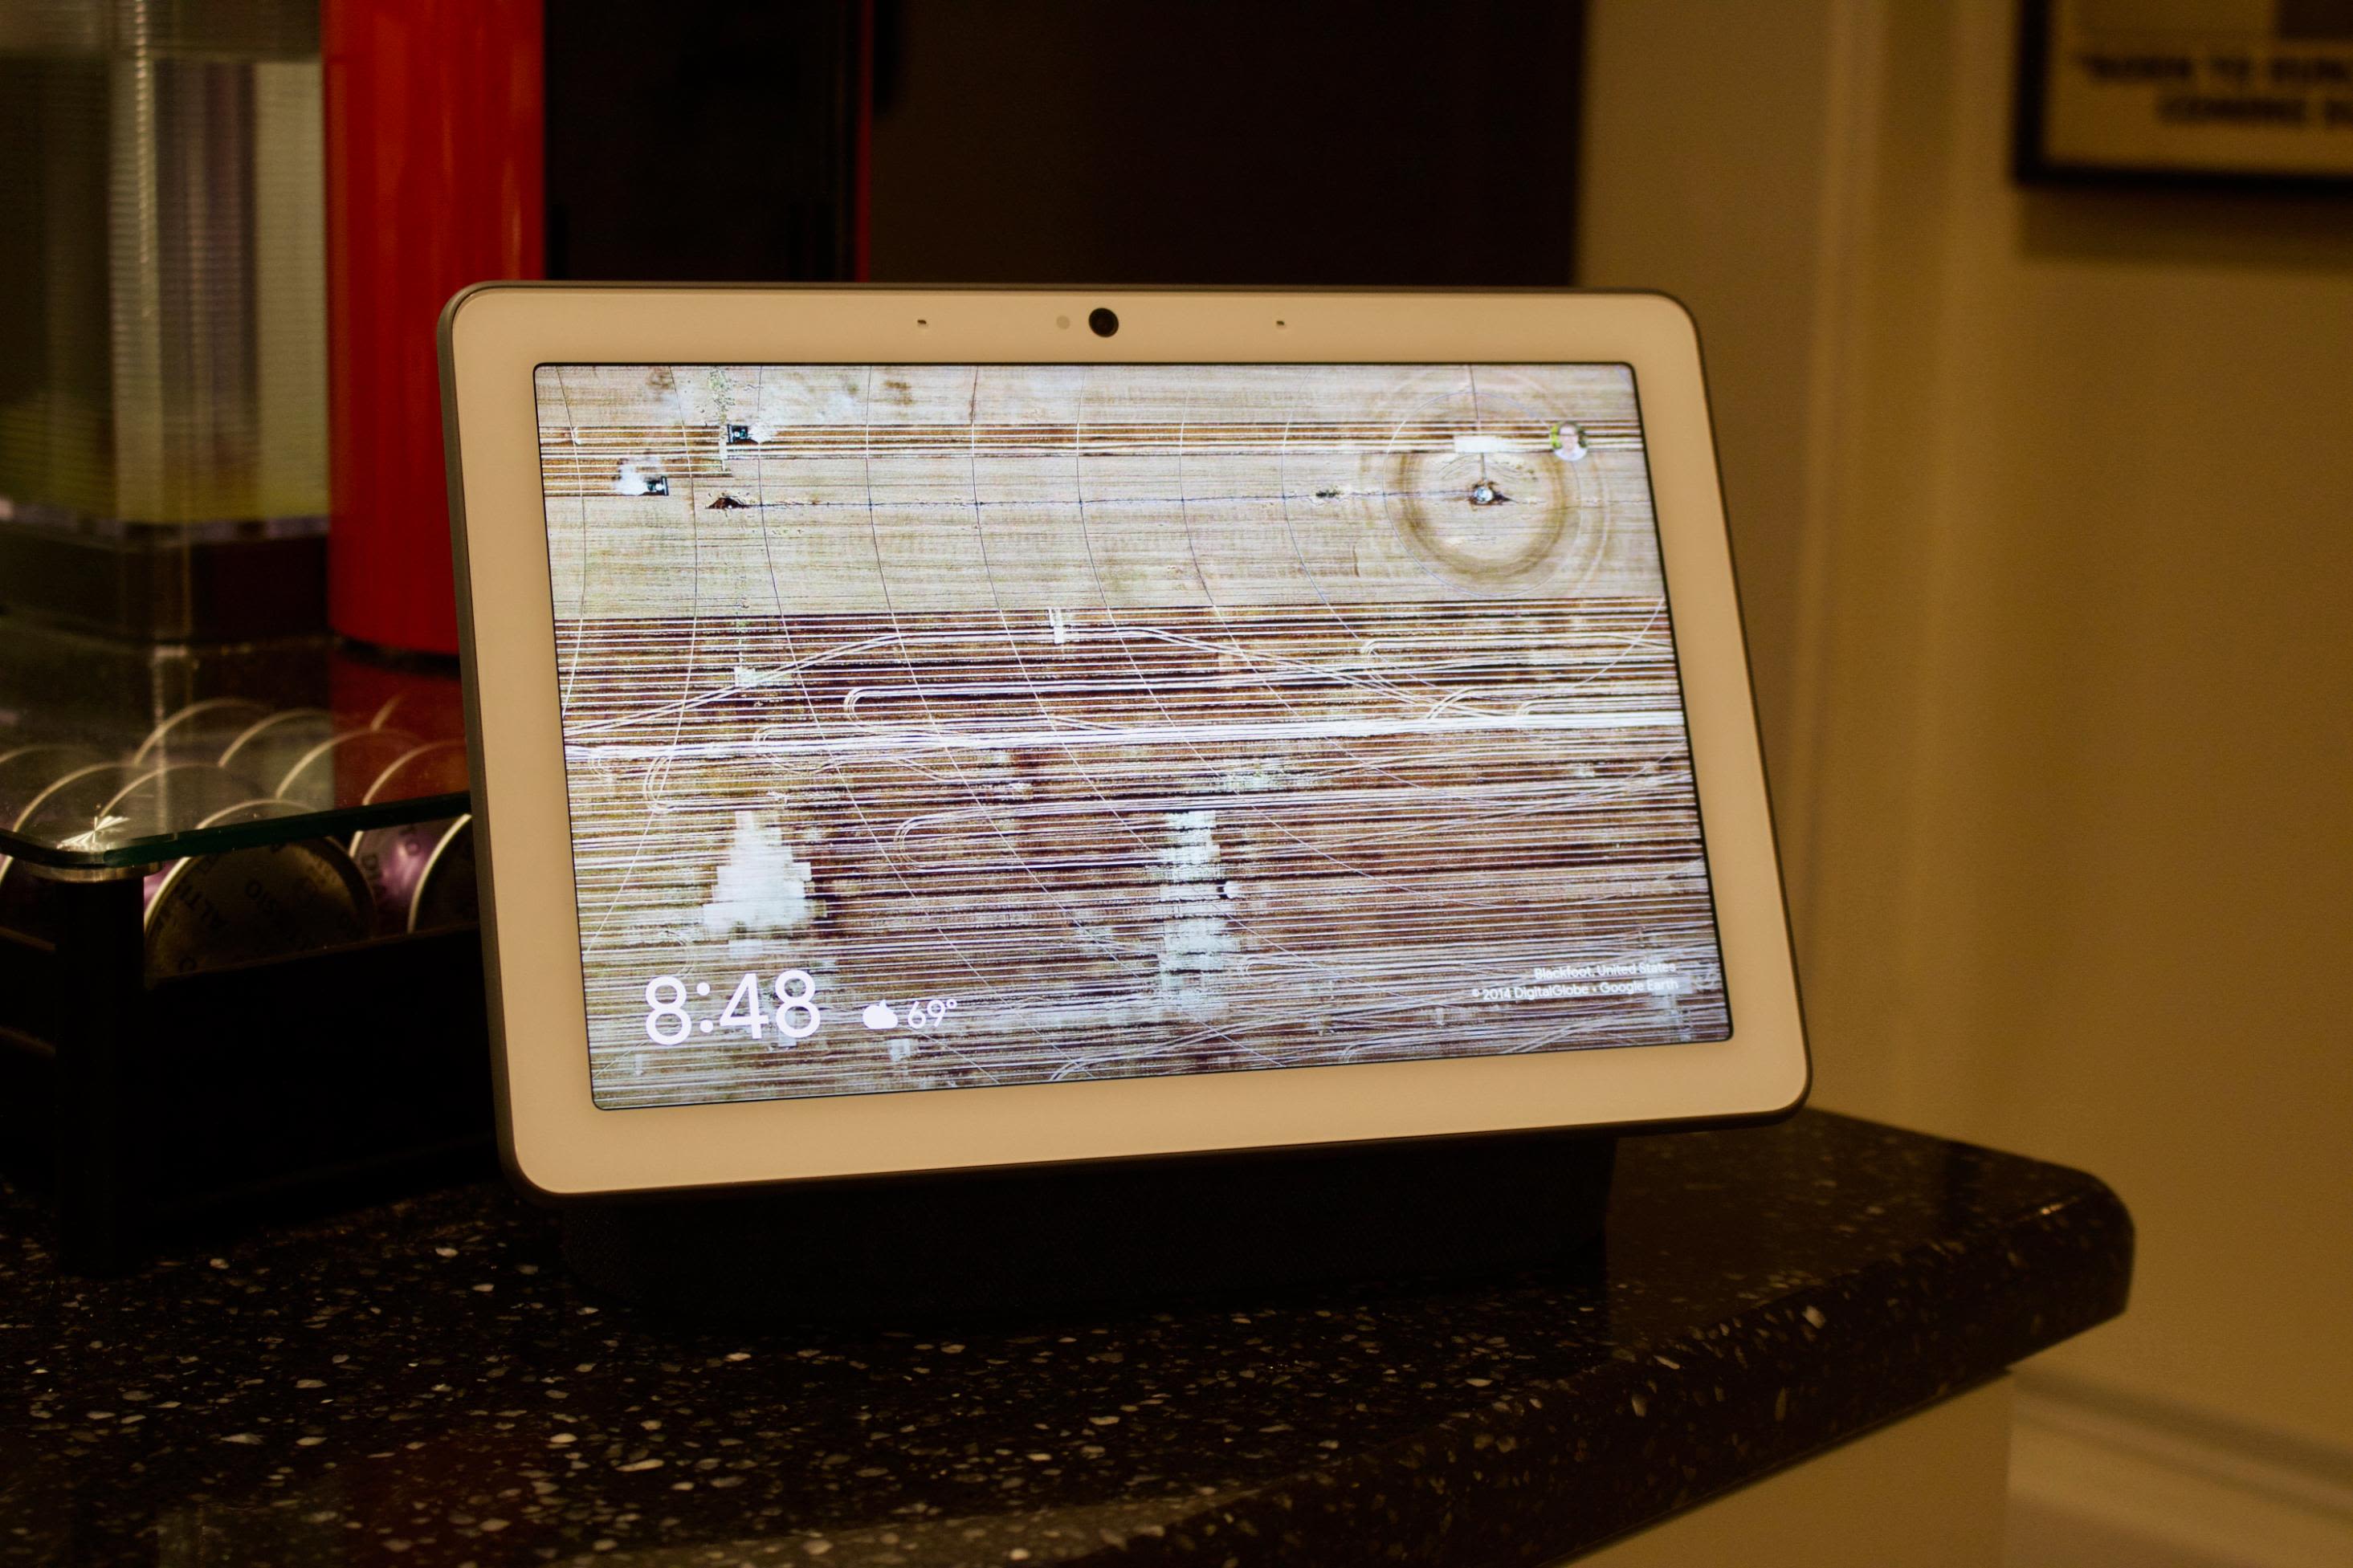 Google Nest Hub Max review: Not the cheapest smart display, but the best